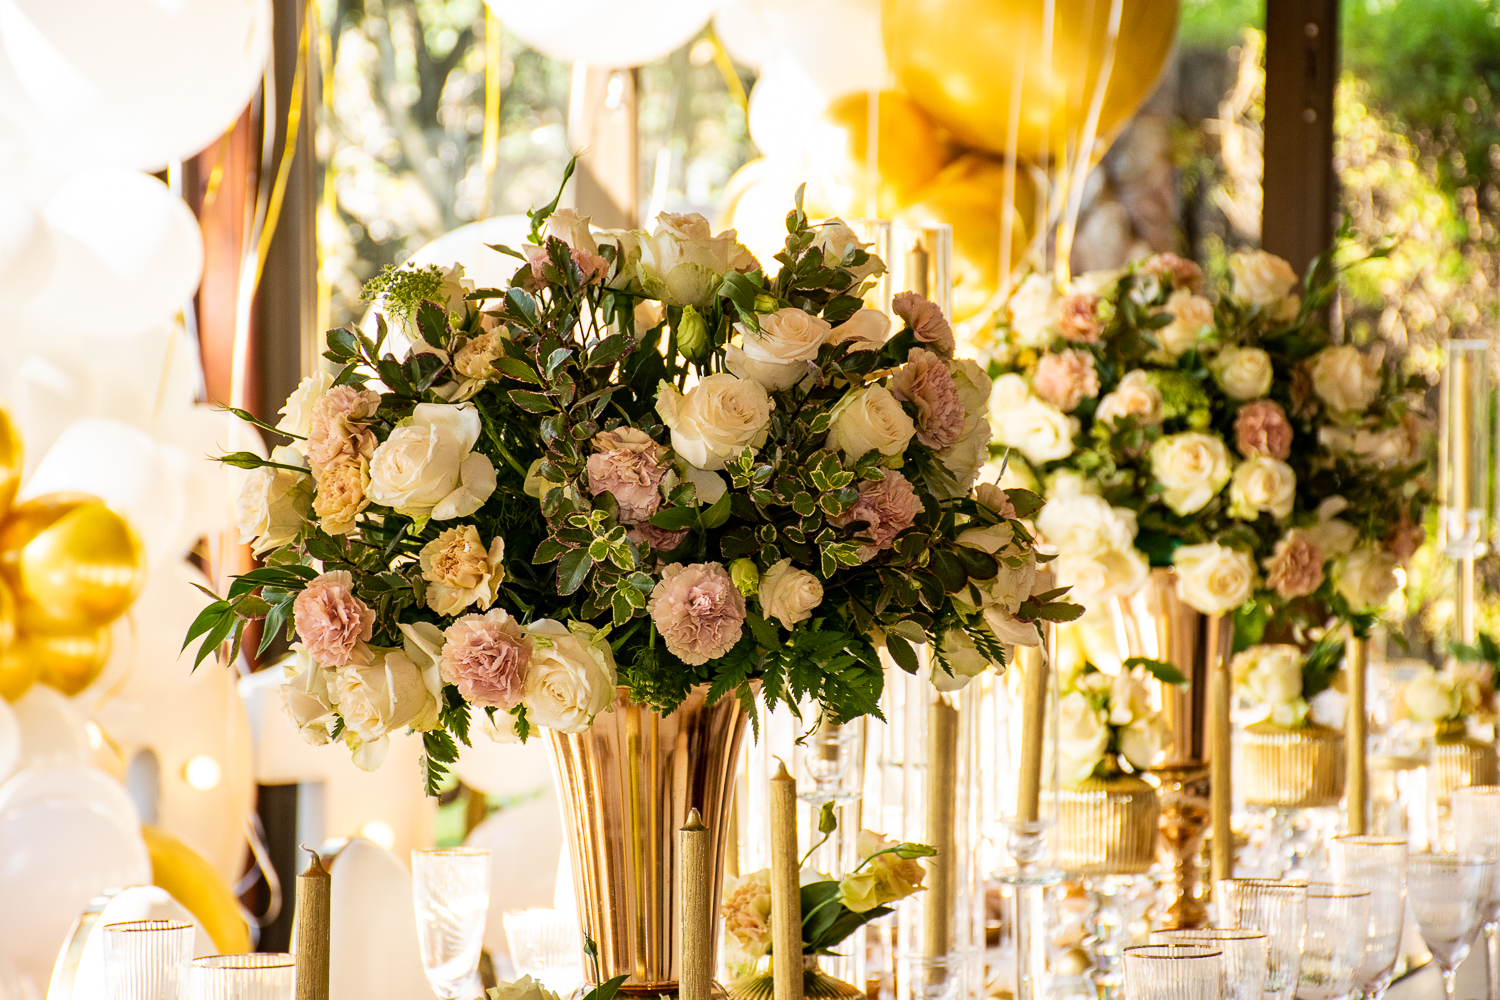 decor and florals by Shubone